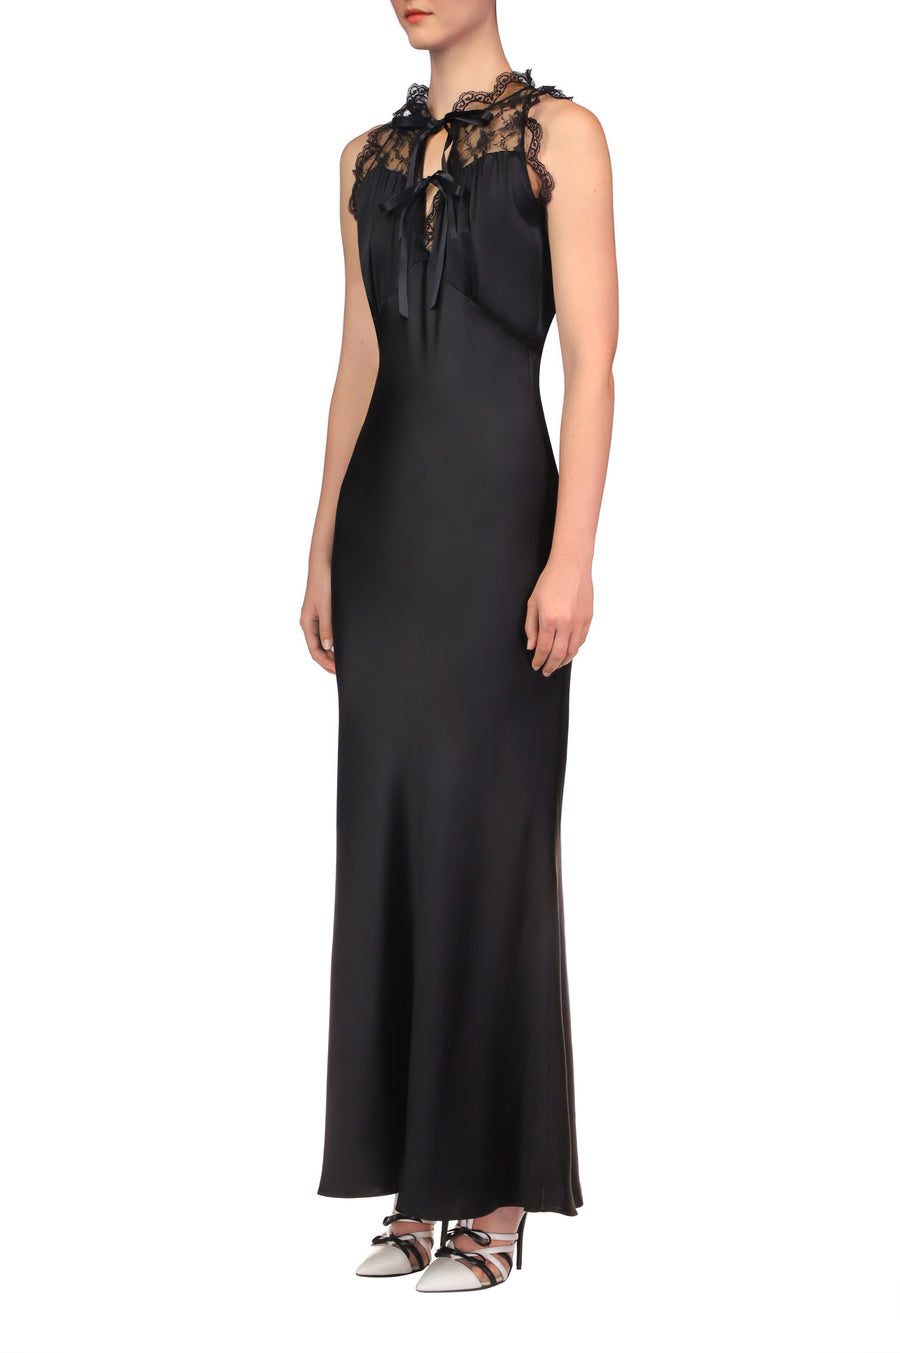 Black Silk Satin Bias Halter Dress With Lace And Ruffle Details